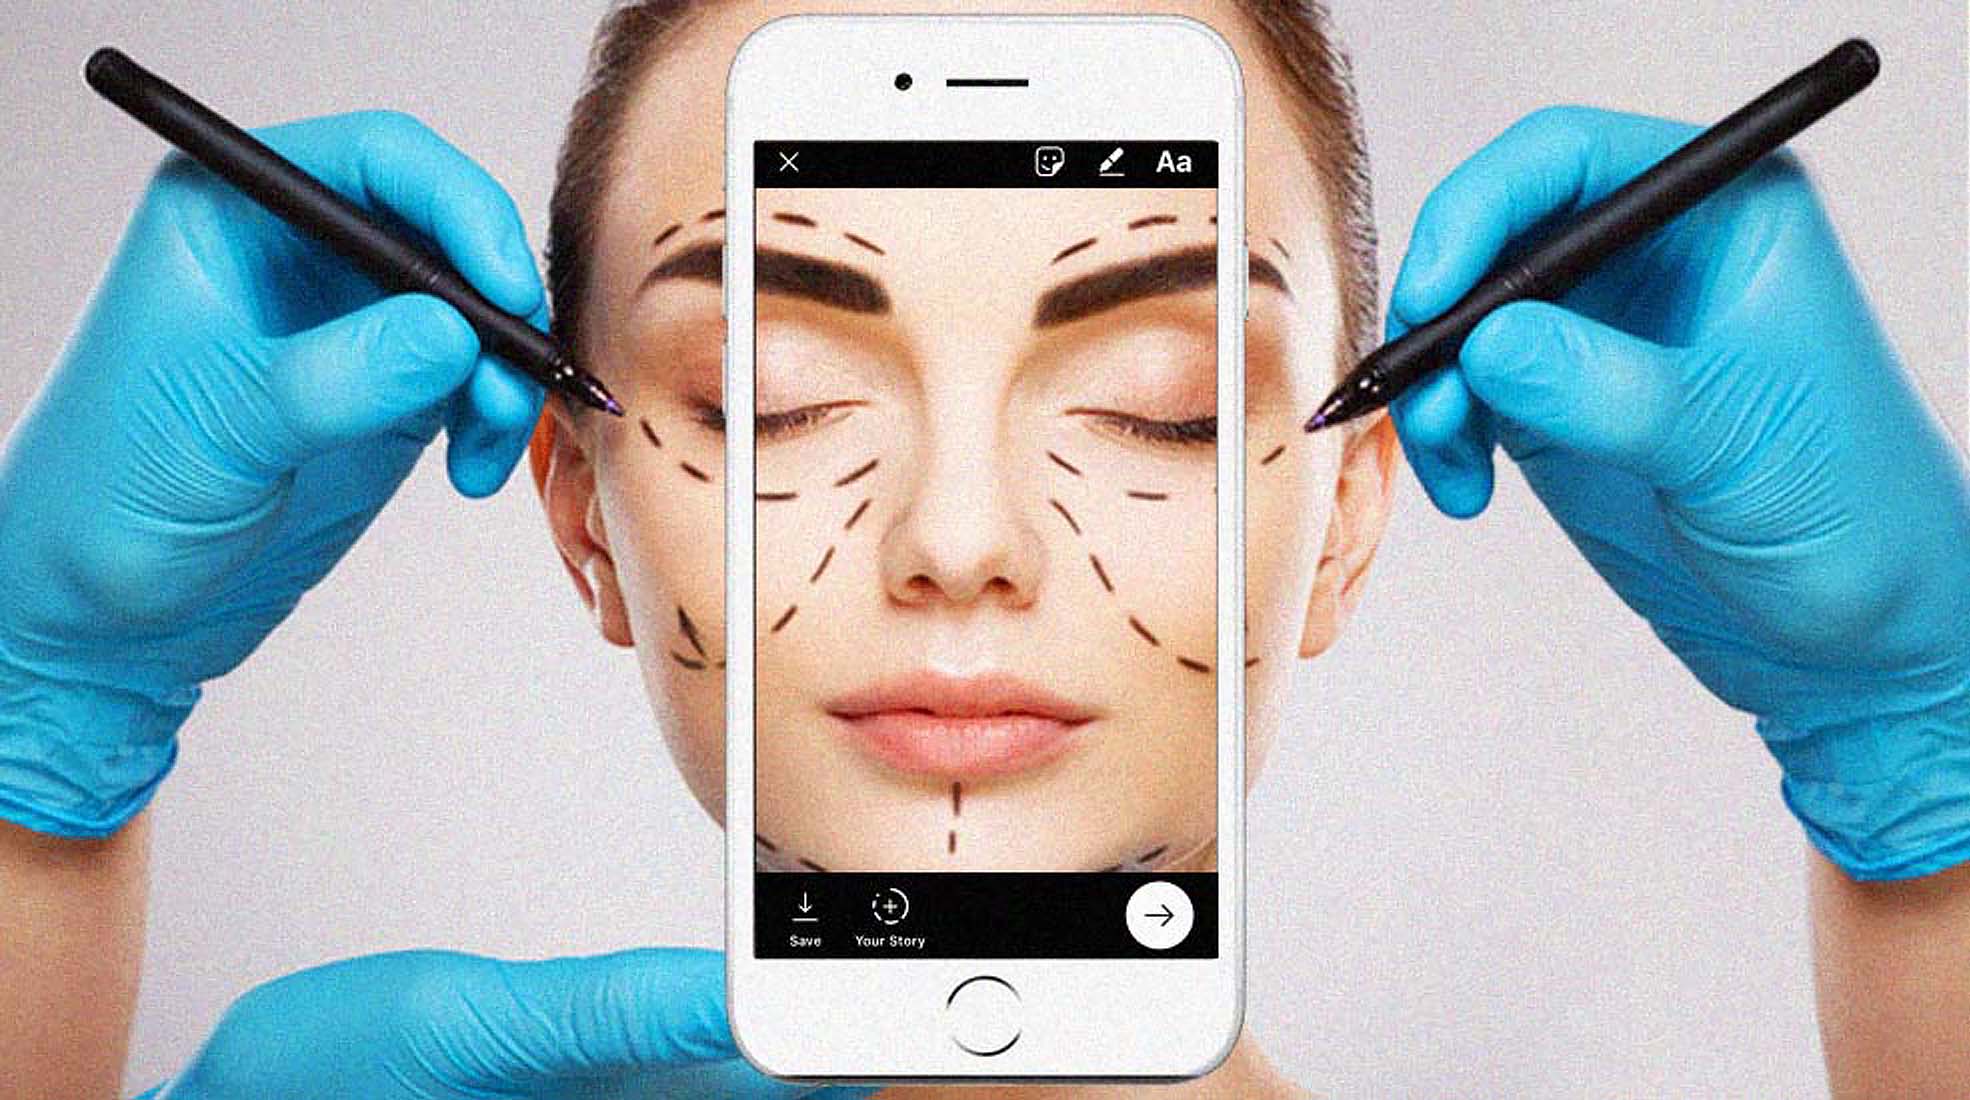 Instagram bans plastic surgery filters - Thred Website.